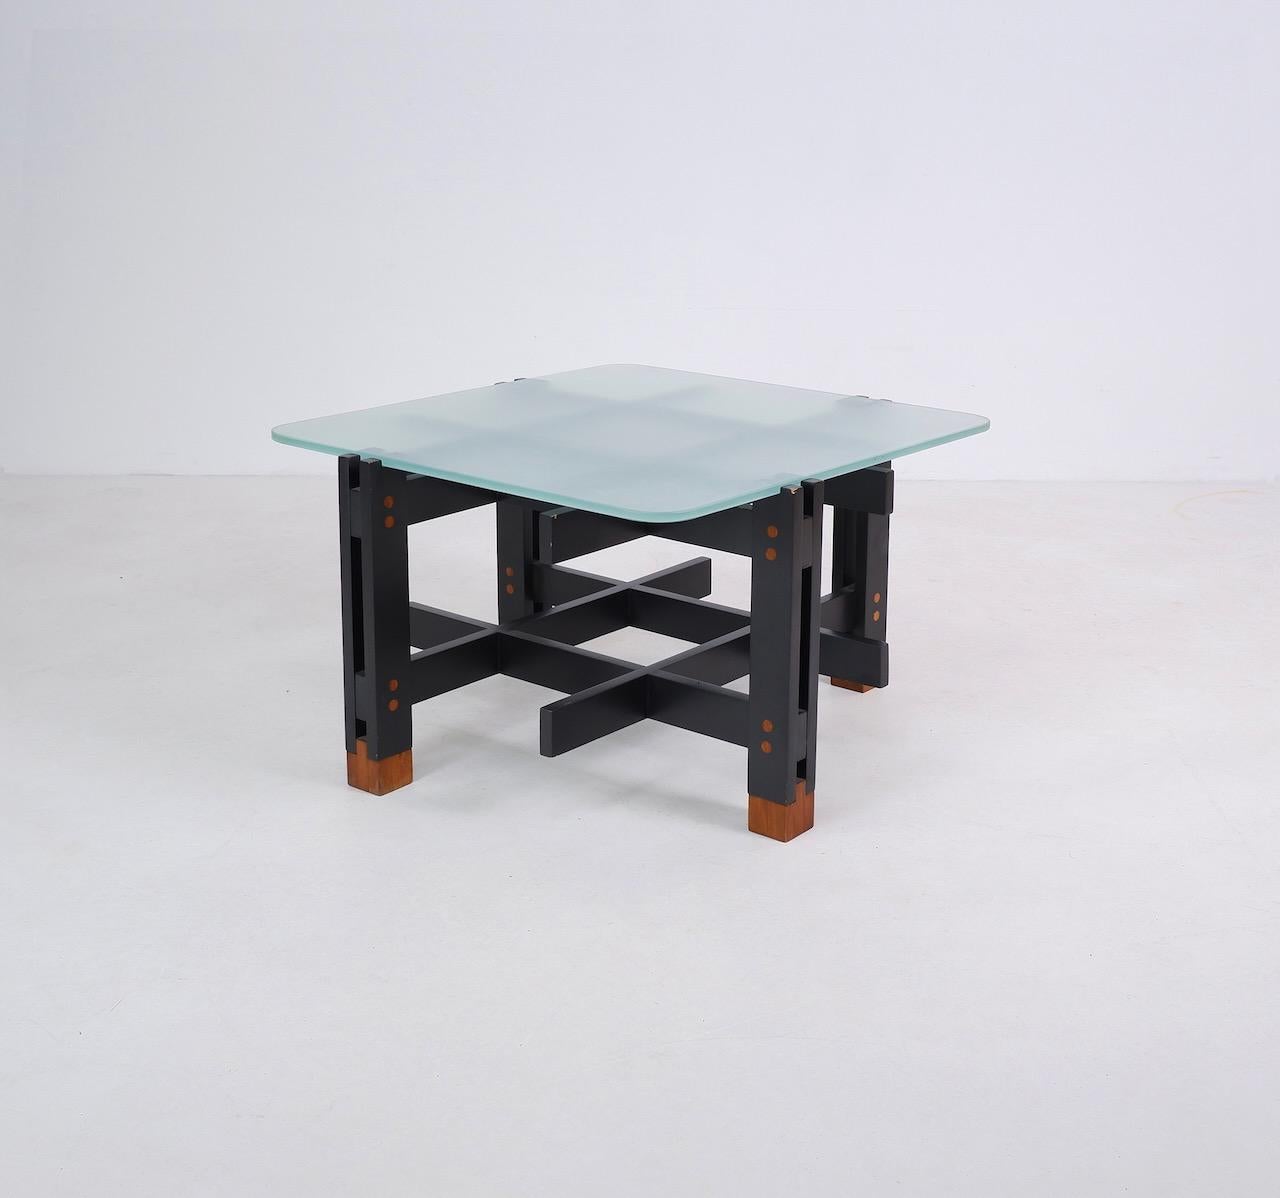 Italian coffee table formed from a black painted wooden lattice frame with contrasting cherry wood detail and frosted glass top. Hints of Gio Ponti and Constructivist designs.